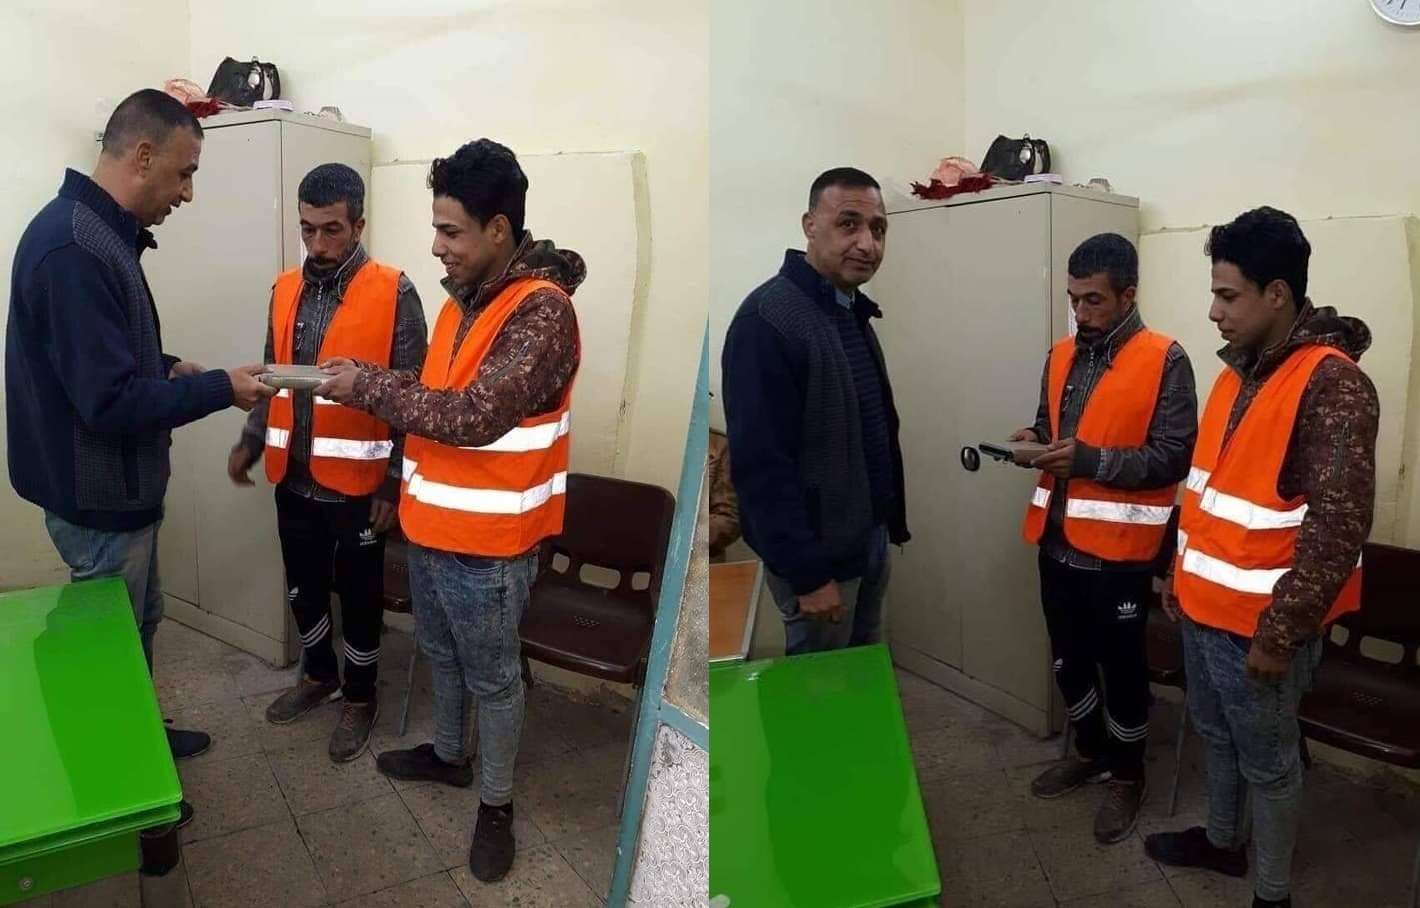 image showing These Iraqi workers gave back 30.000 US $ they found, and they were rewarded with 1 copy of the Quran.